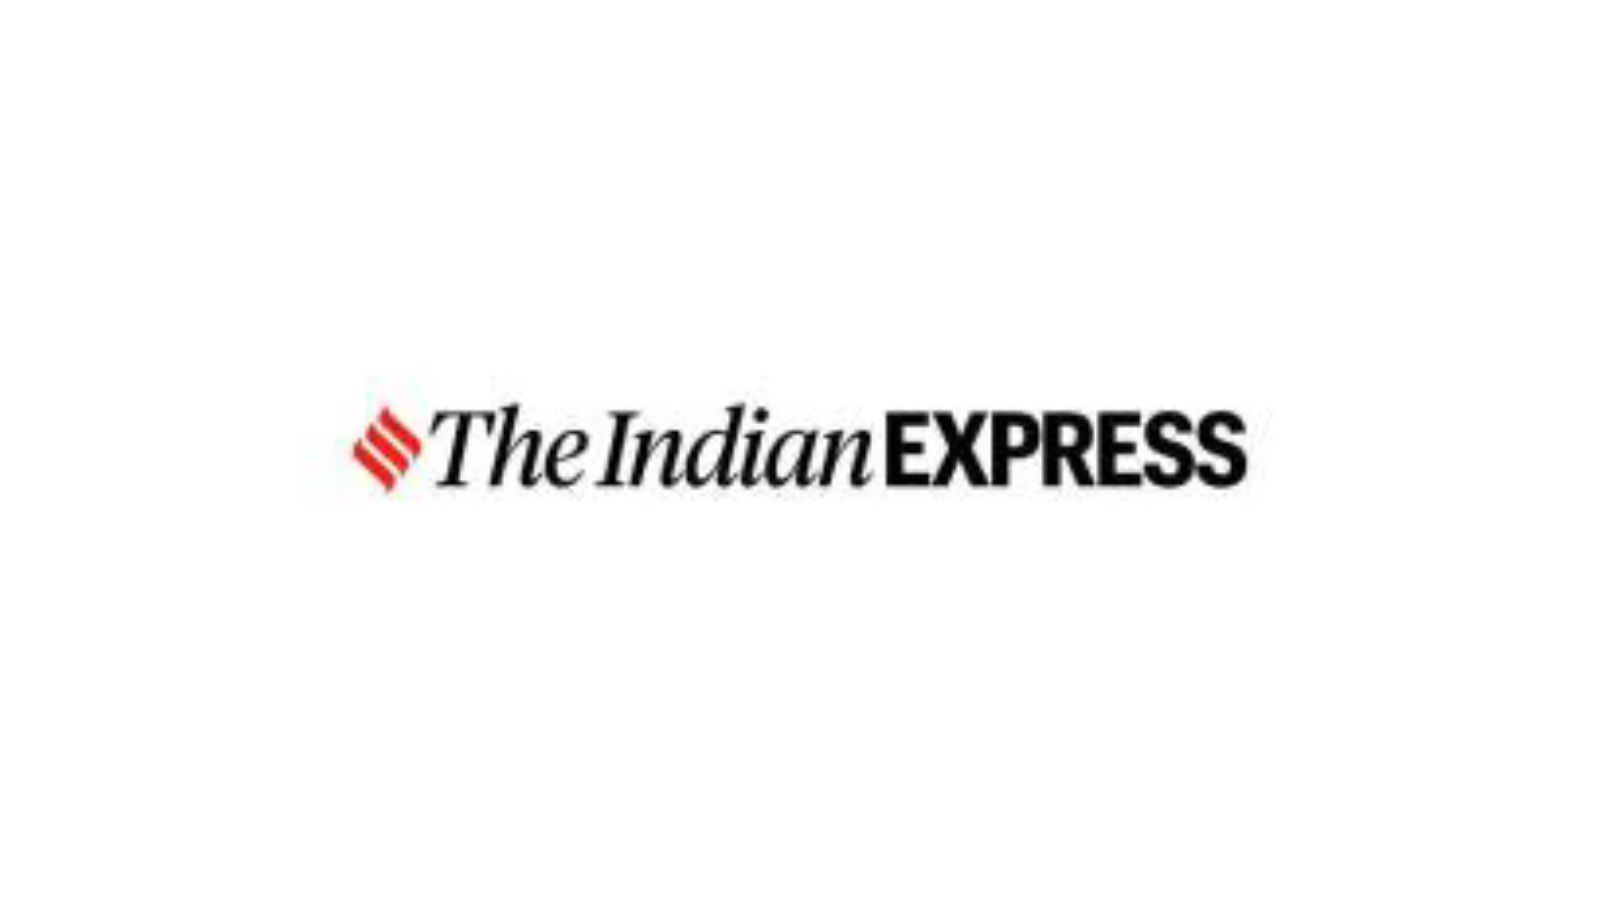 Deadly crash in US kills 3 women; victims reportedly from India – The Indian Express